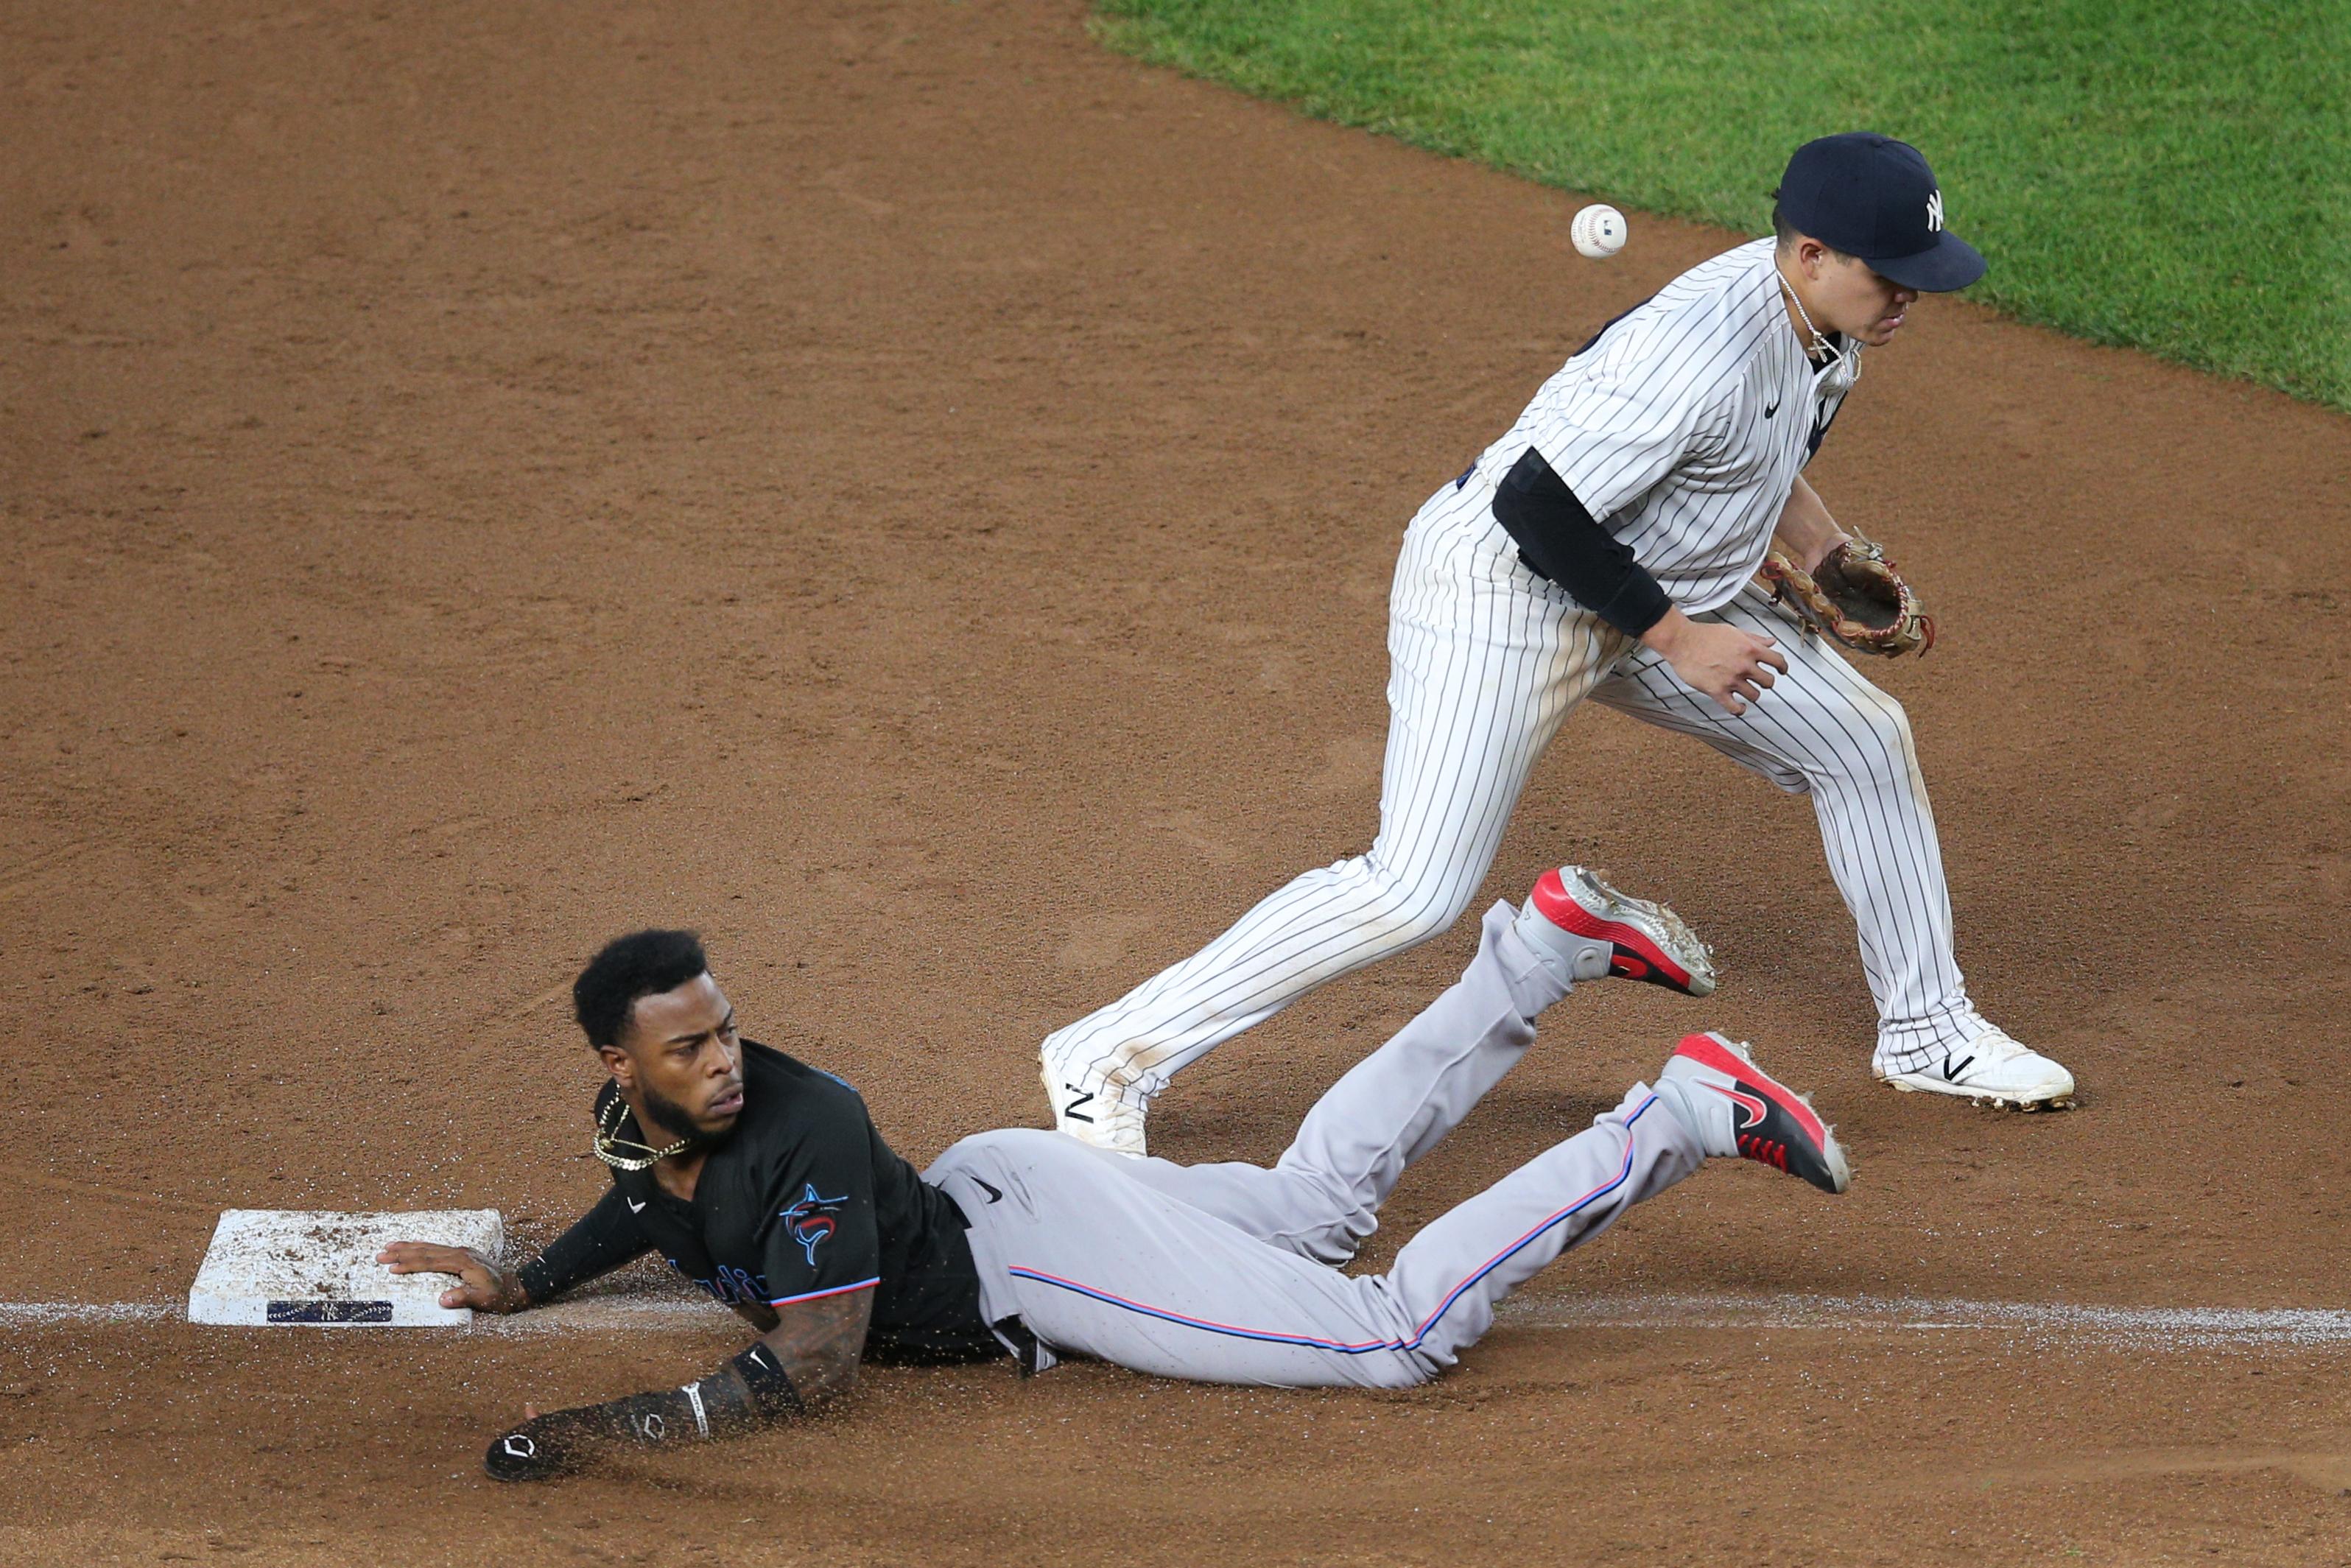 Sep 25, 2020; Bronx, New York, USA; Miami Marlins pinch runner Monte Harrison (4) slides back into third in front of New York Yankees third baseman Gio Urshela (29) after being hit in the back by a throw during a rundown during the tenth inning at Yankee Stadium. Mandatory Credit: Brad Penner-USA TODAY Sports / © Brad Penner-USA TODAY Sports